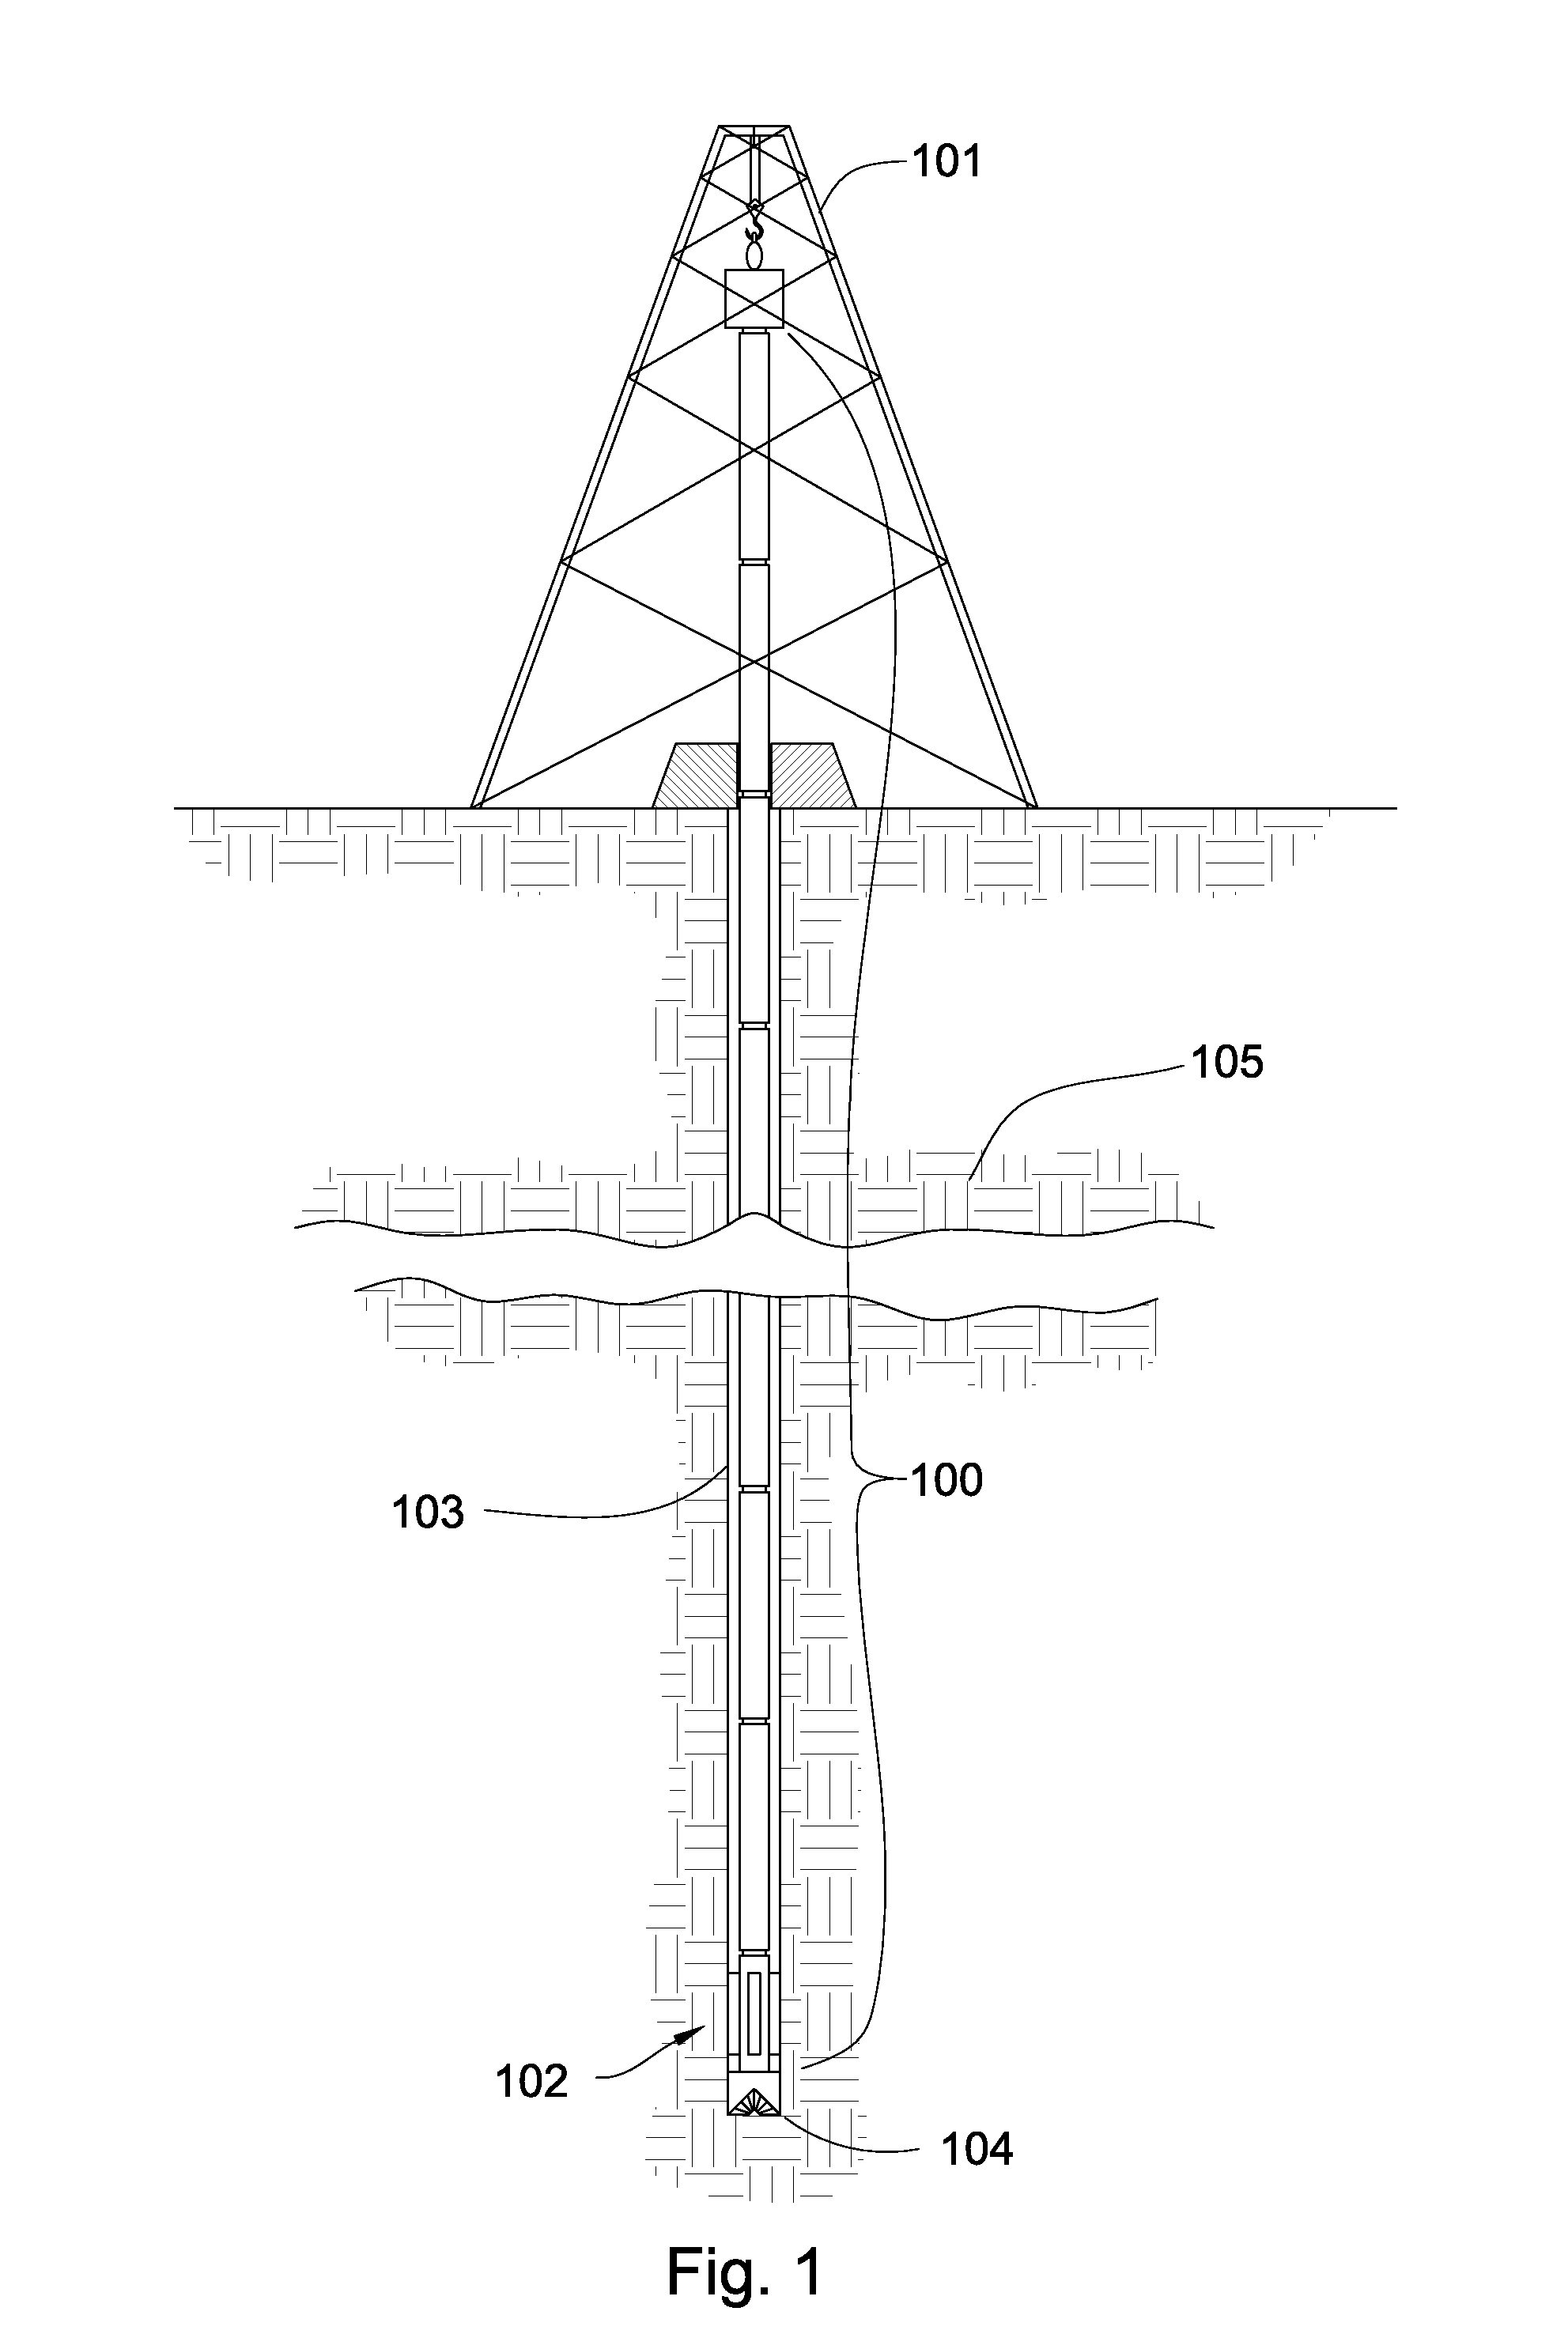 Battery with a Moveable Membrane Separating a Cathode and Anode Cavity